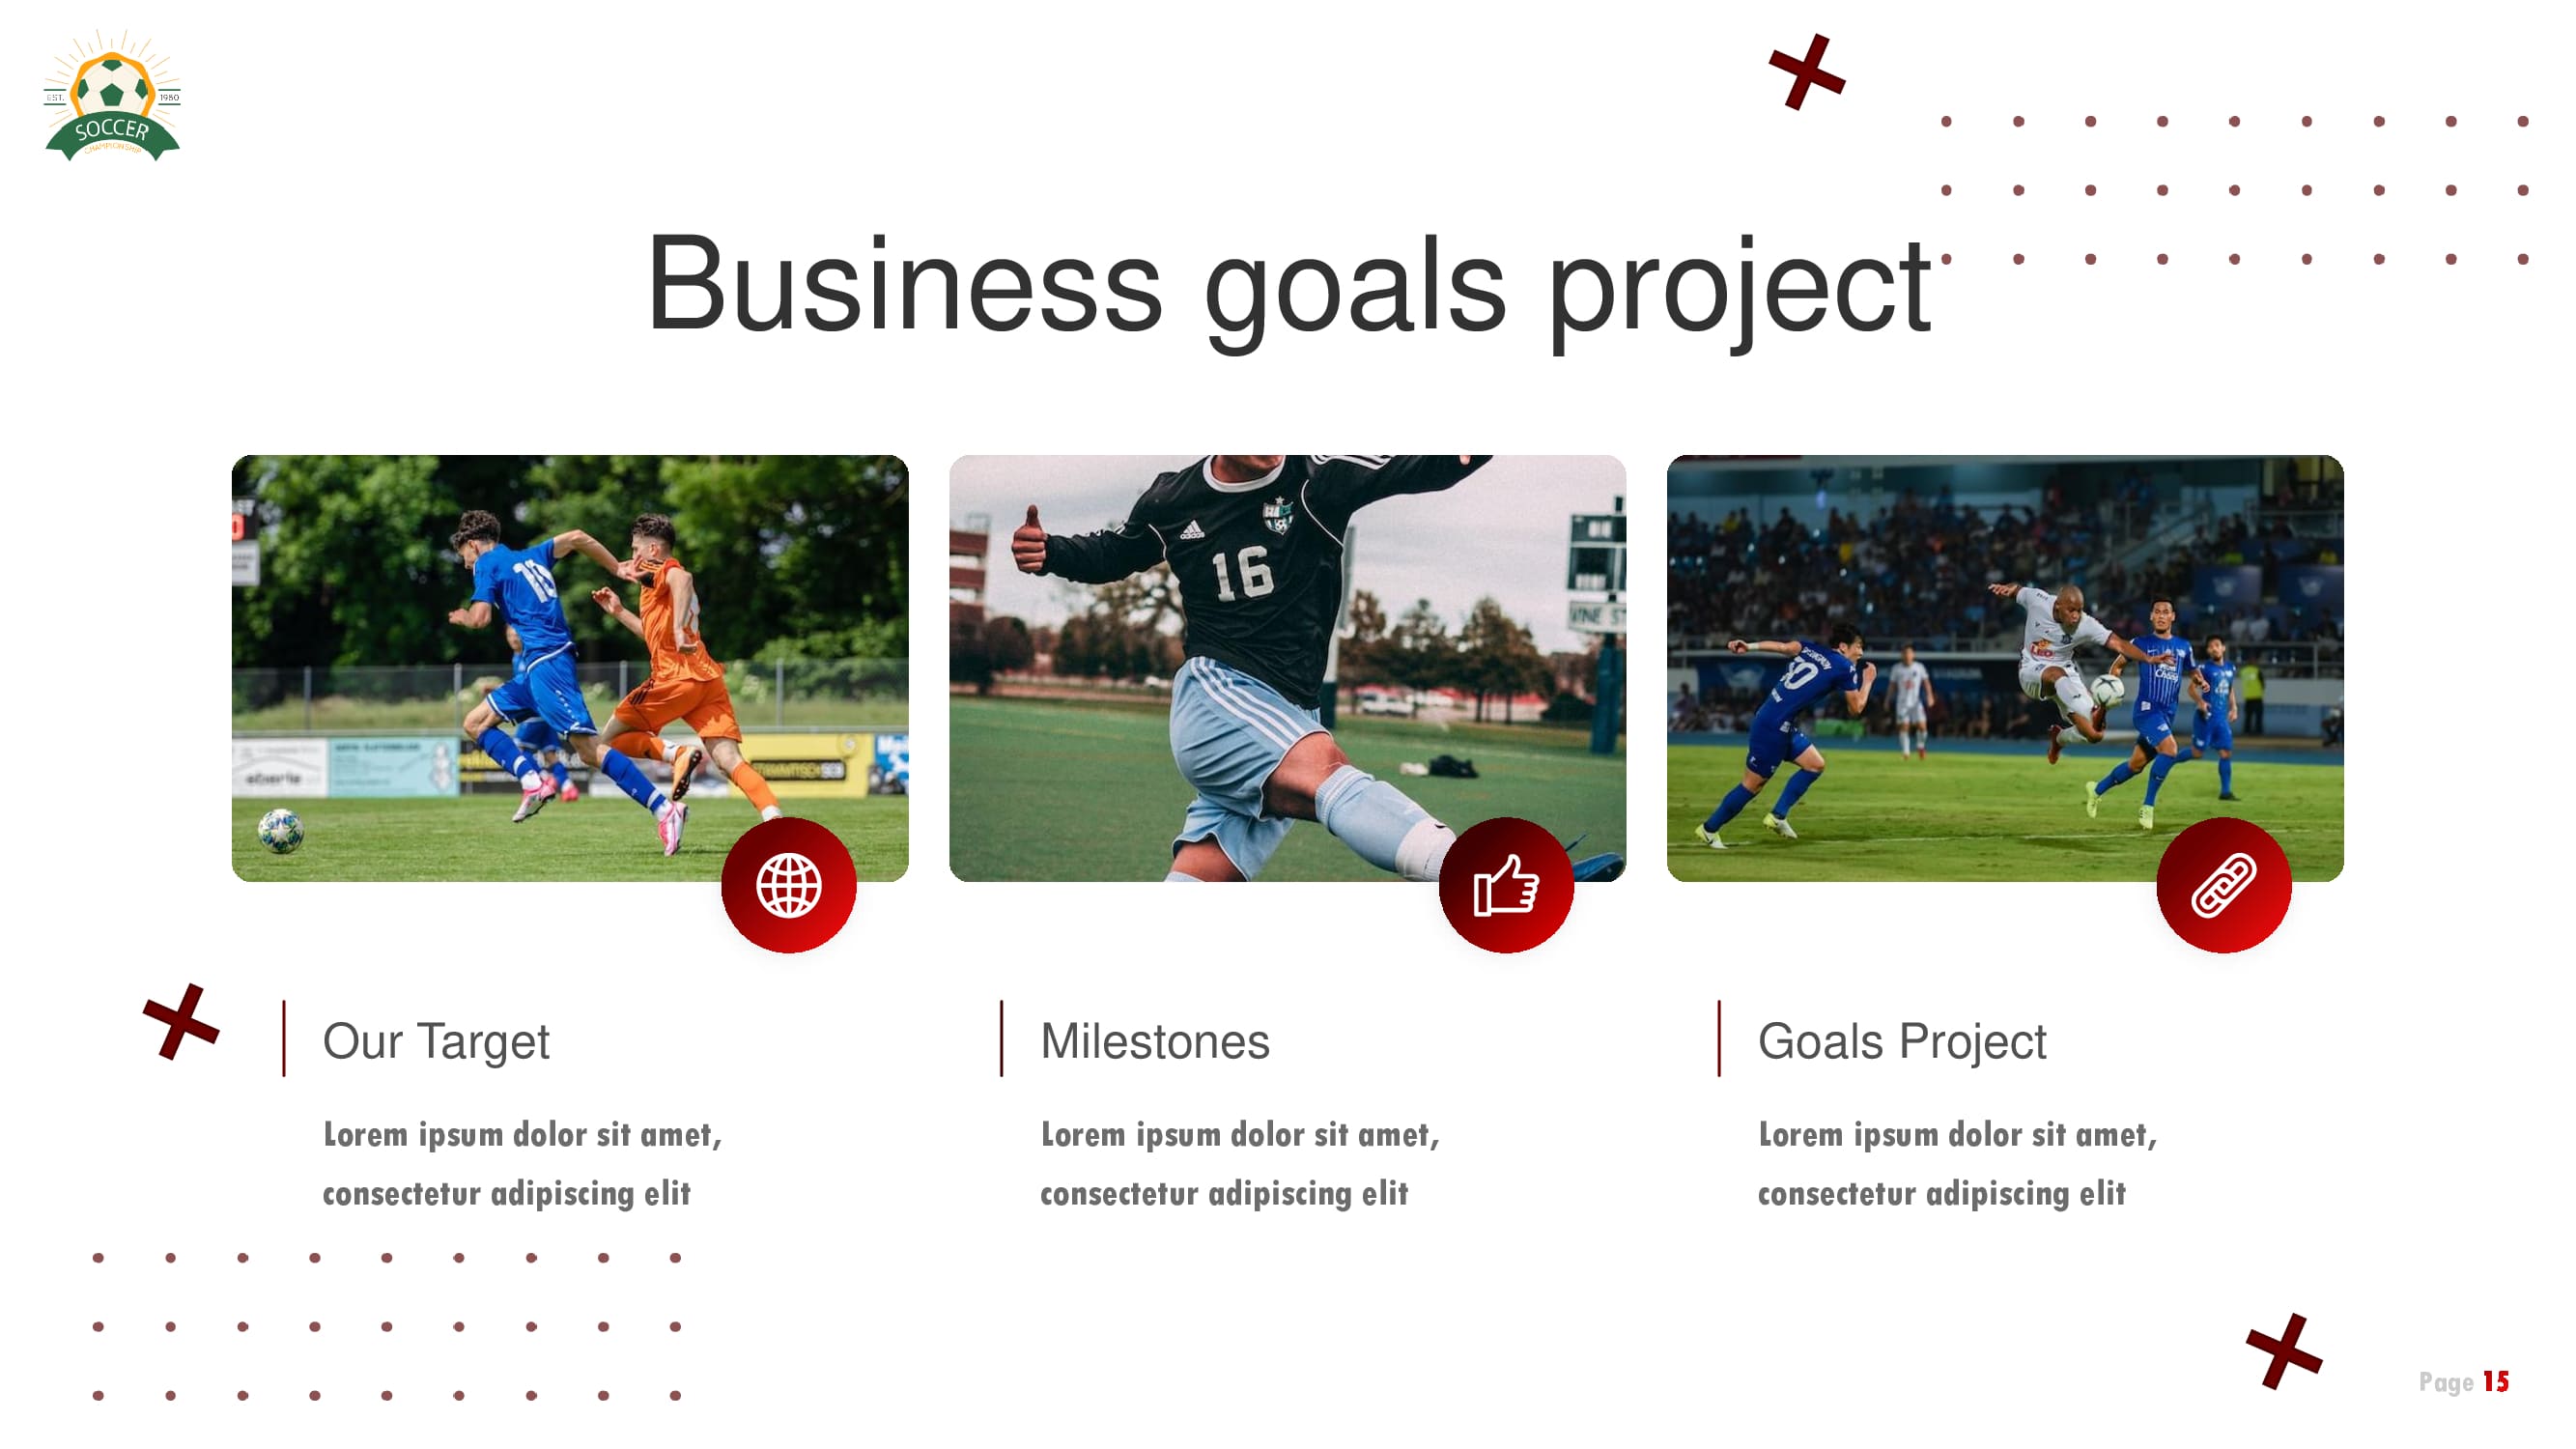 A slide for business goals project with 3 images and descriptions for them.